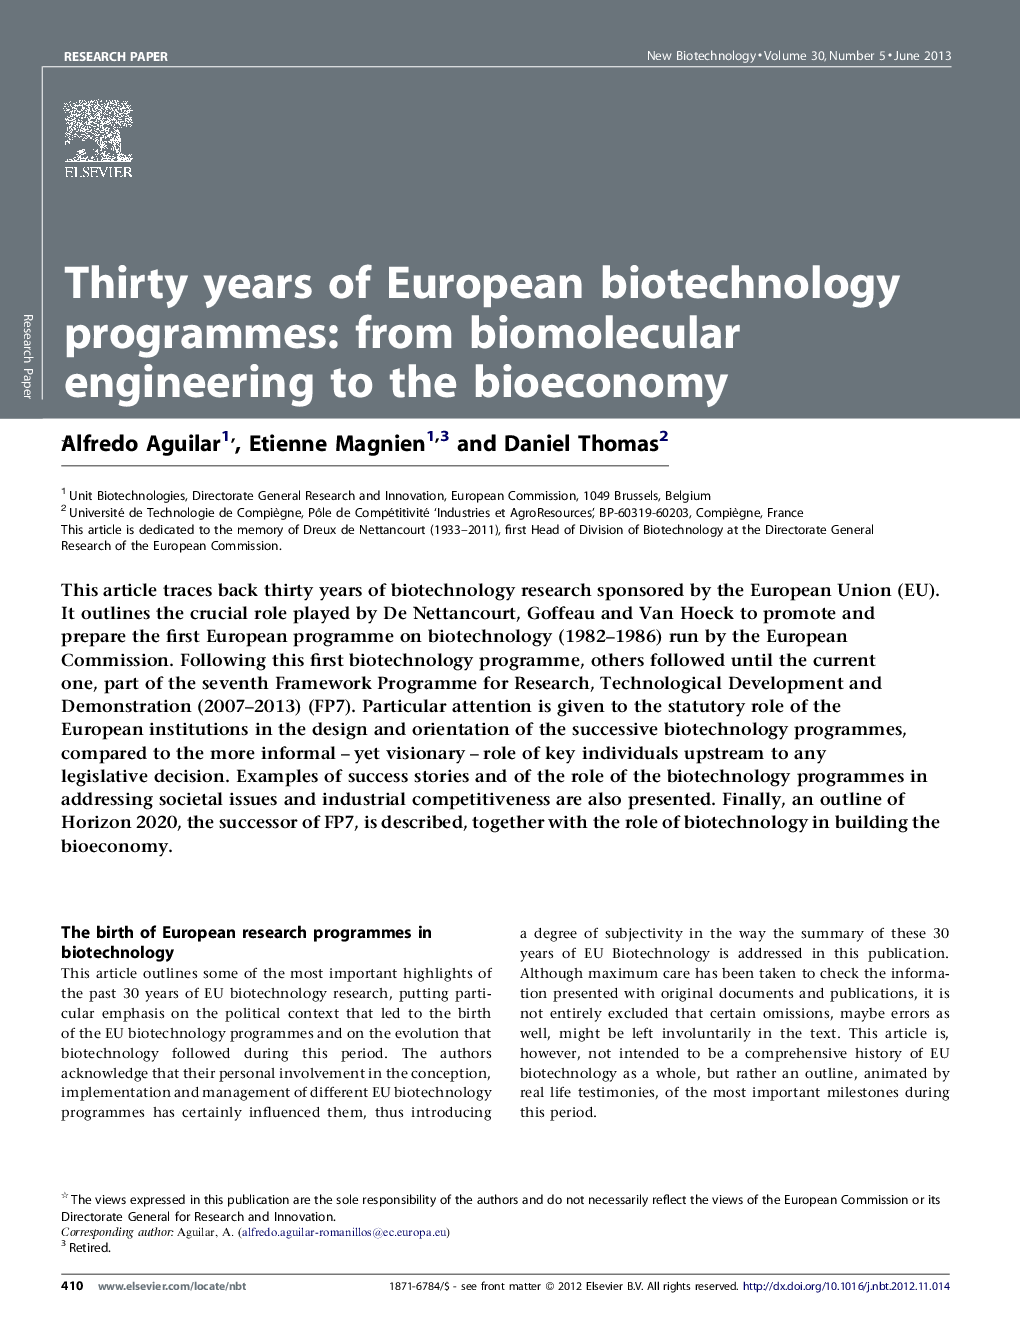 Thirty years of European biotechnology programmes: from biomolecular engineering to the bioeconomy 